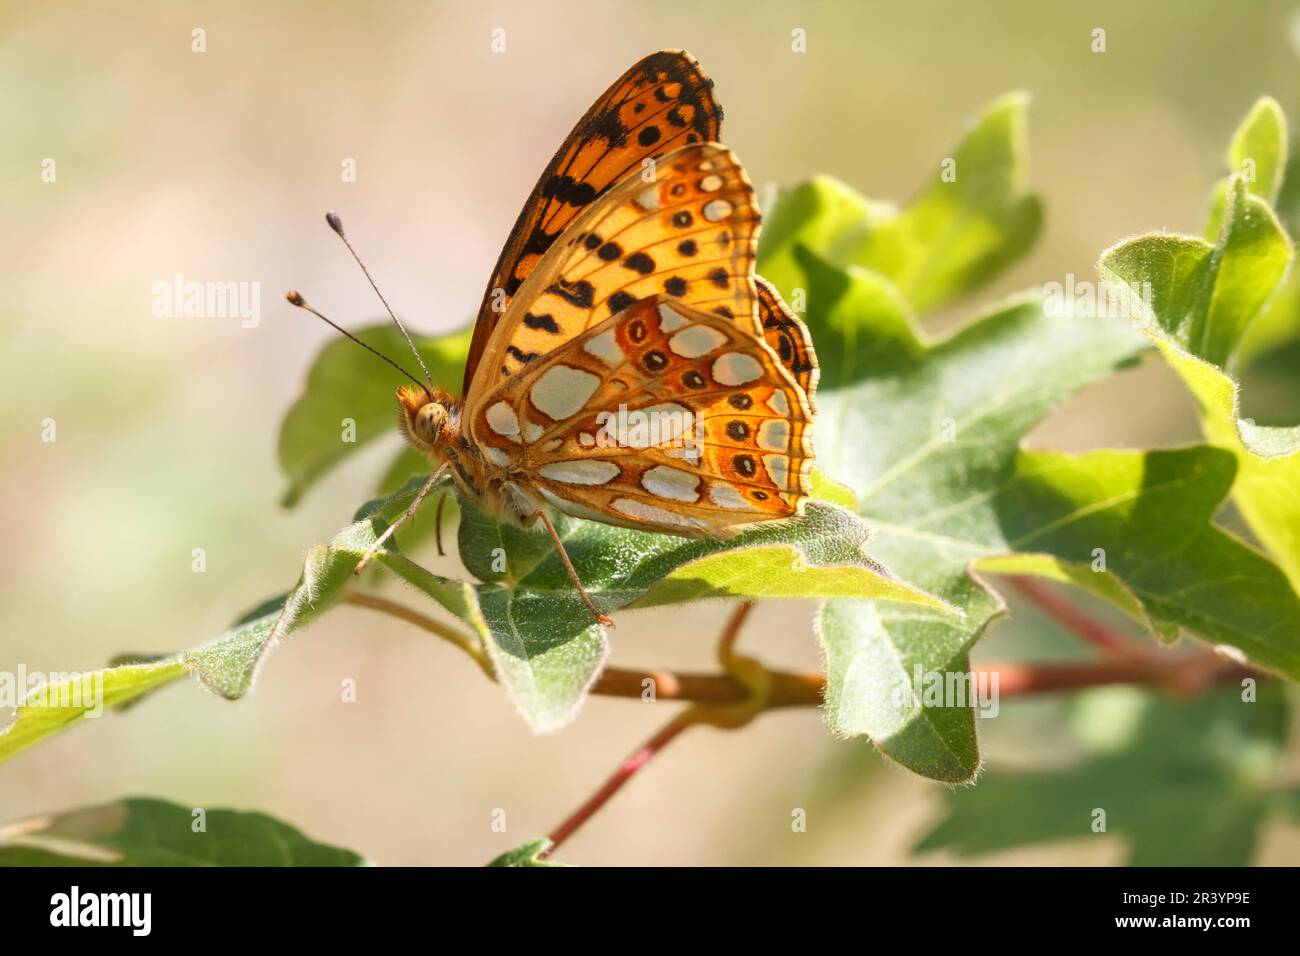 Issoria lathonia, Kleiner Perlmuttfalter, Silbriger Perlmuttfalter - Issoria lathonia, known as the Queen of Spain fritillary butterfly from Europe Stock Photo